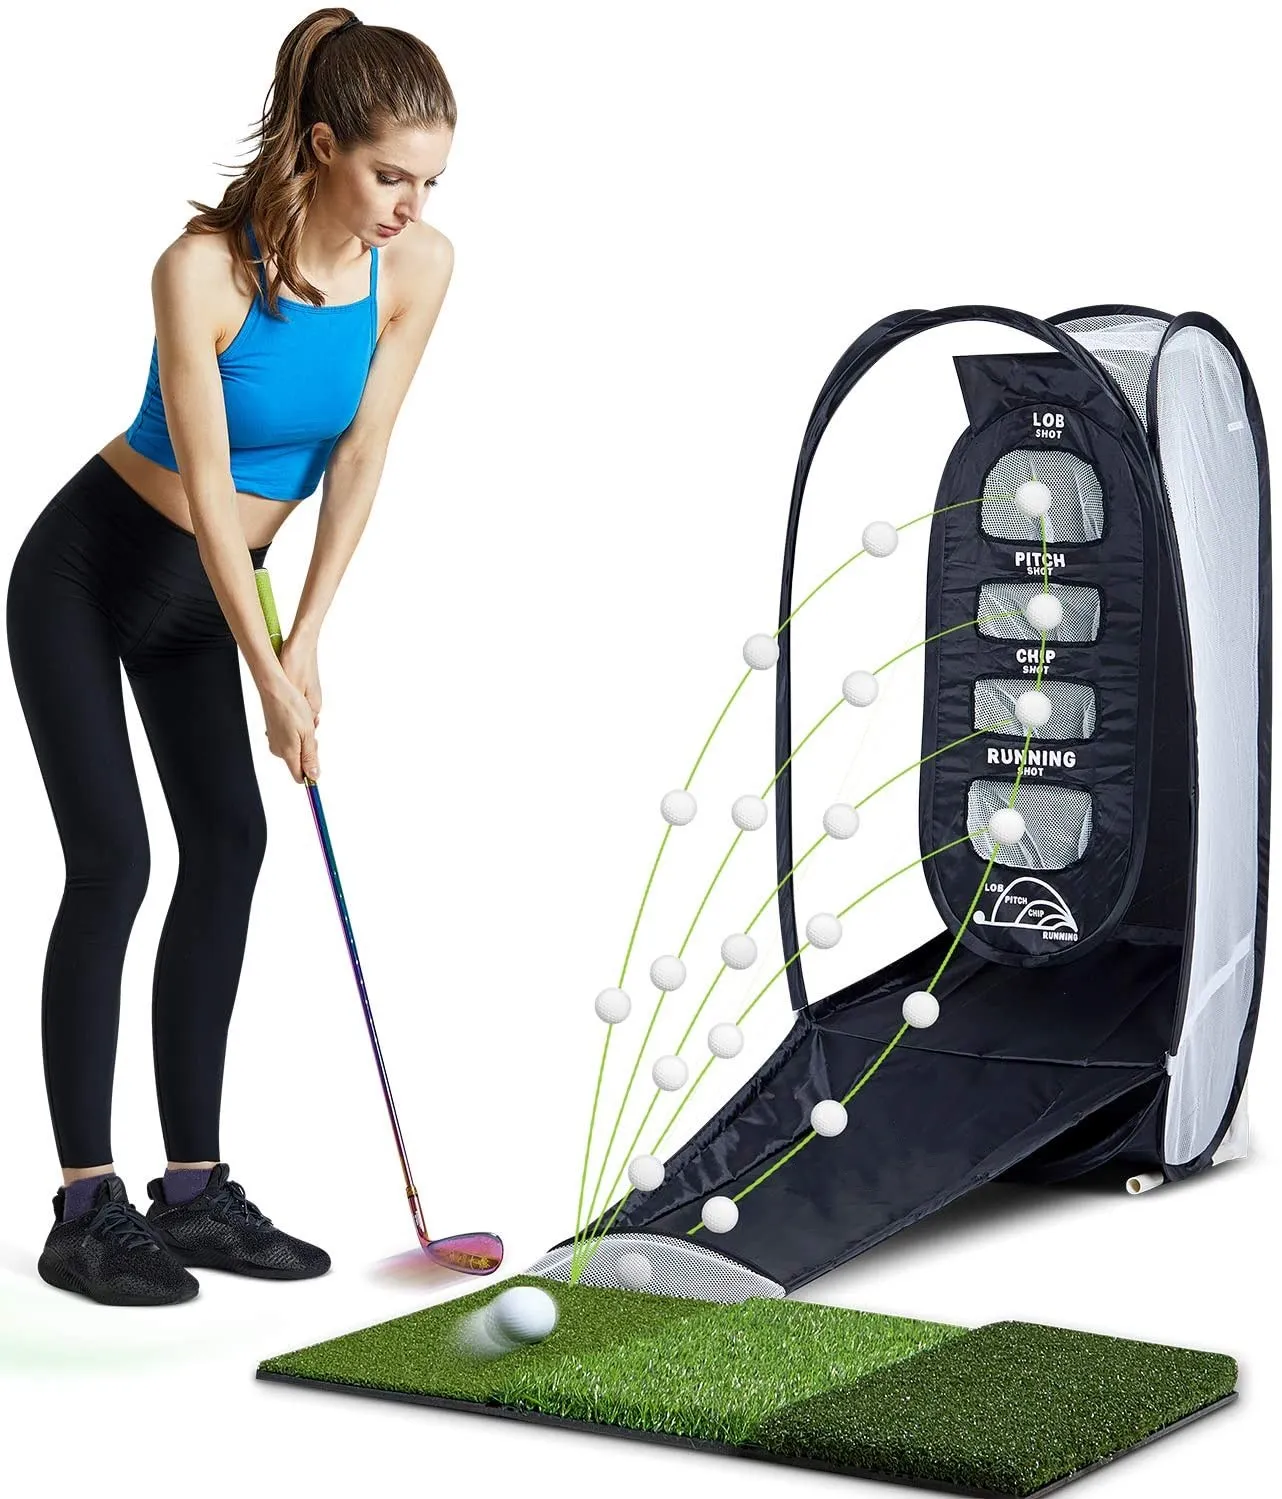 

Golf Practice Hitting Net Indoor Backyard Home Chipping 2 Target and Ball Swing Training Aids, Green